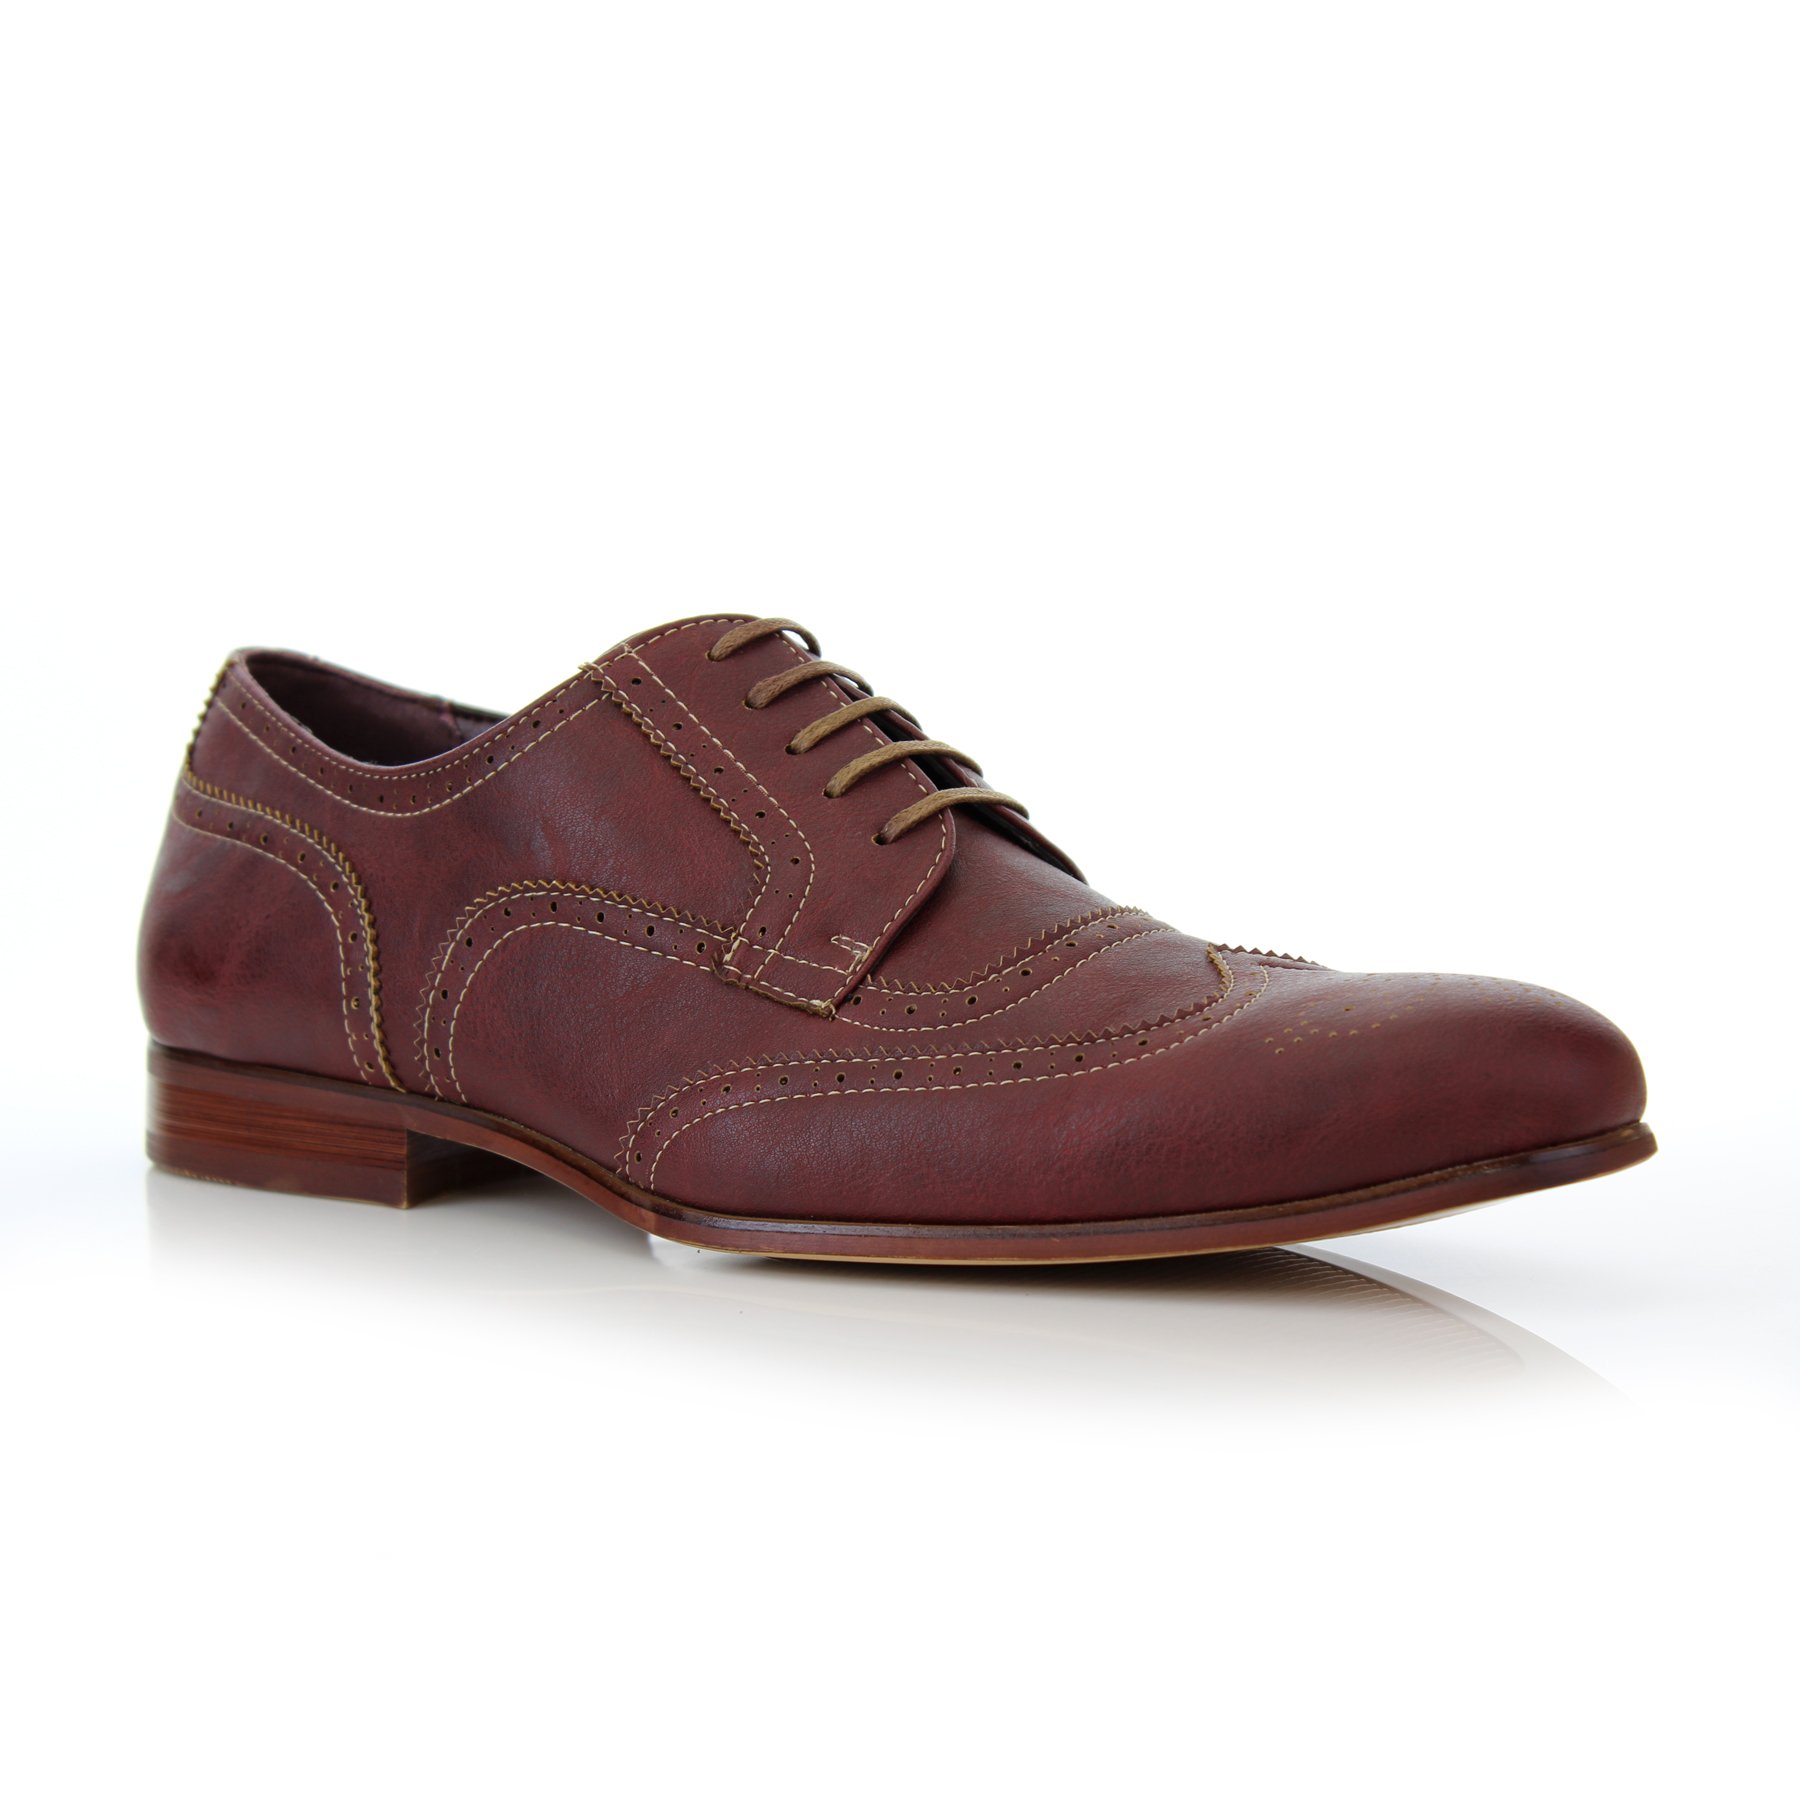 Ferro Aldo Vincent MFA139356E Mens Classic Perforated Duo-Texture Lace-up Wingtip Oxford Dress Shoes - image 1 of 3